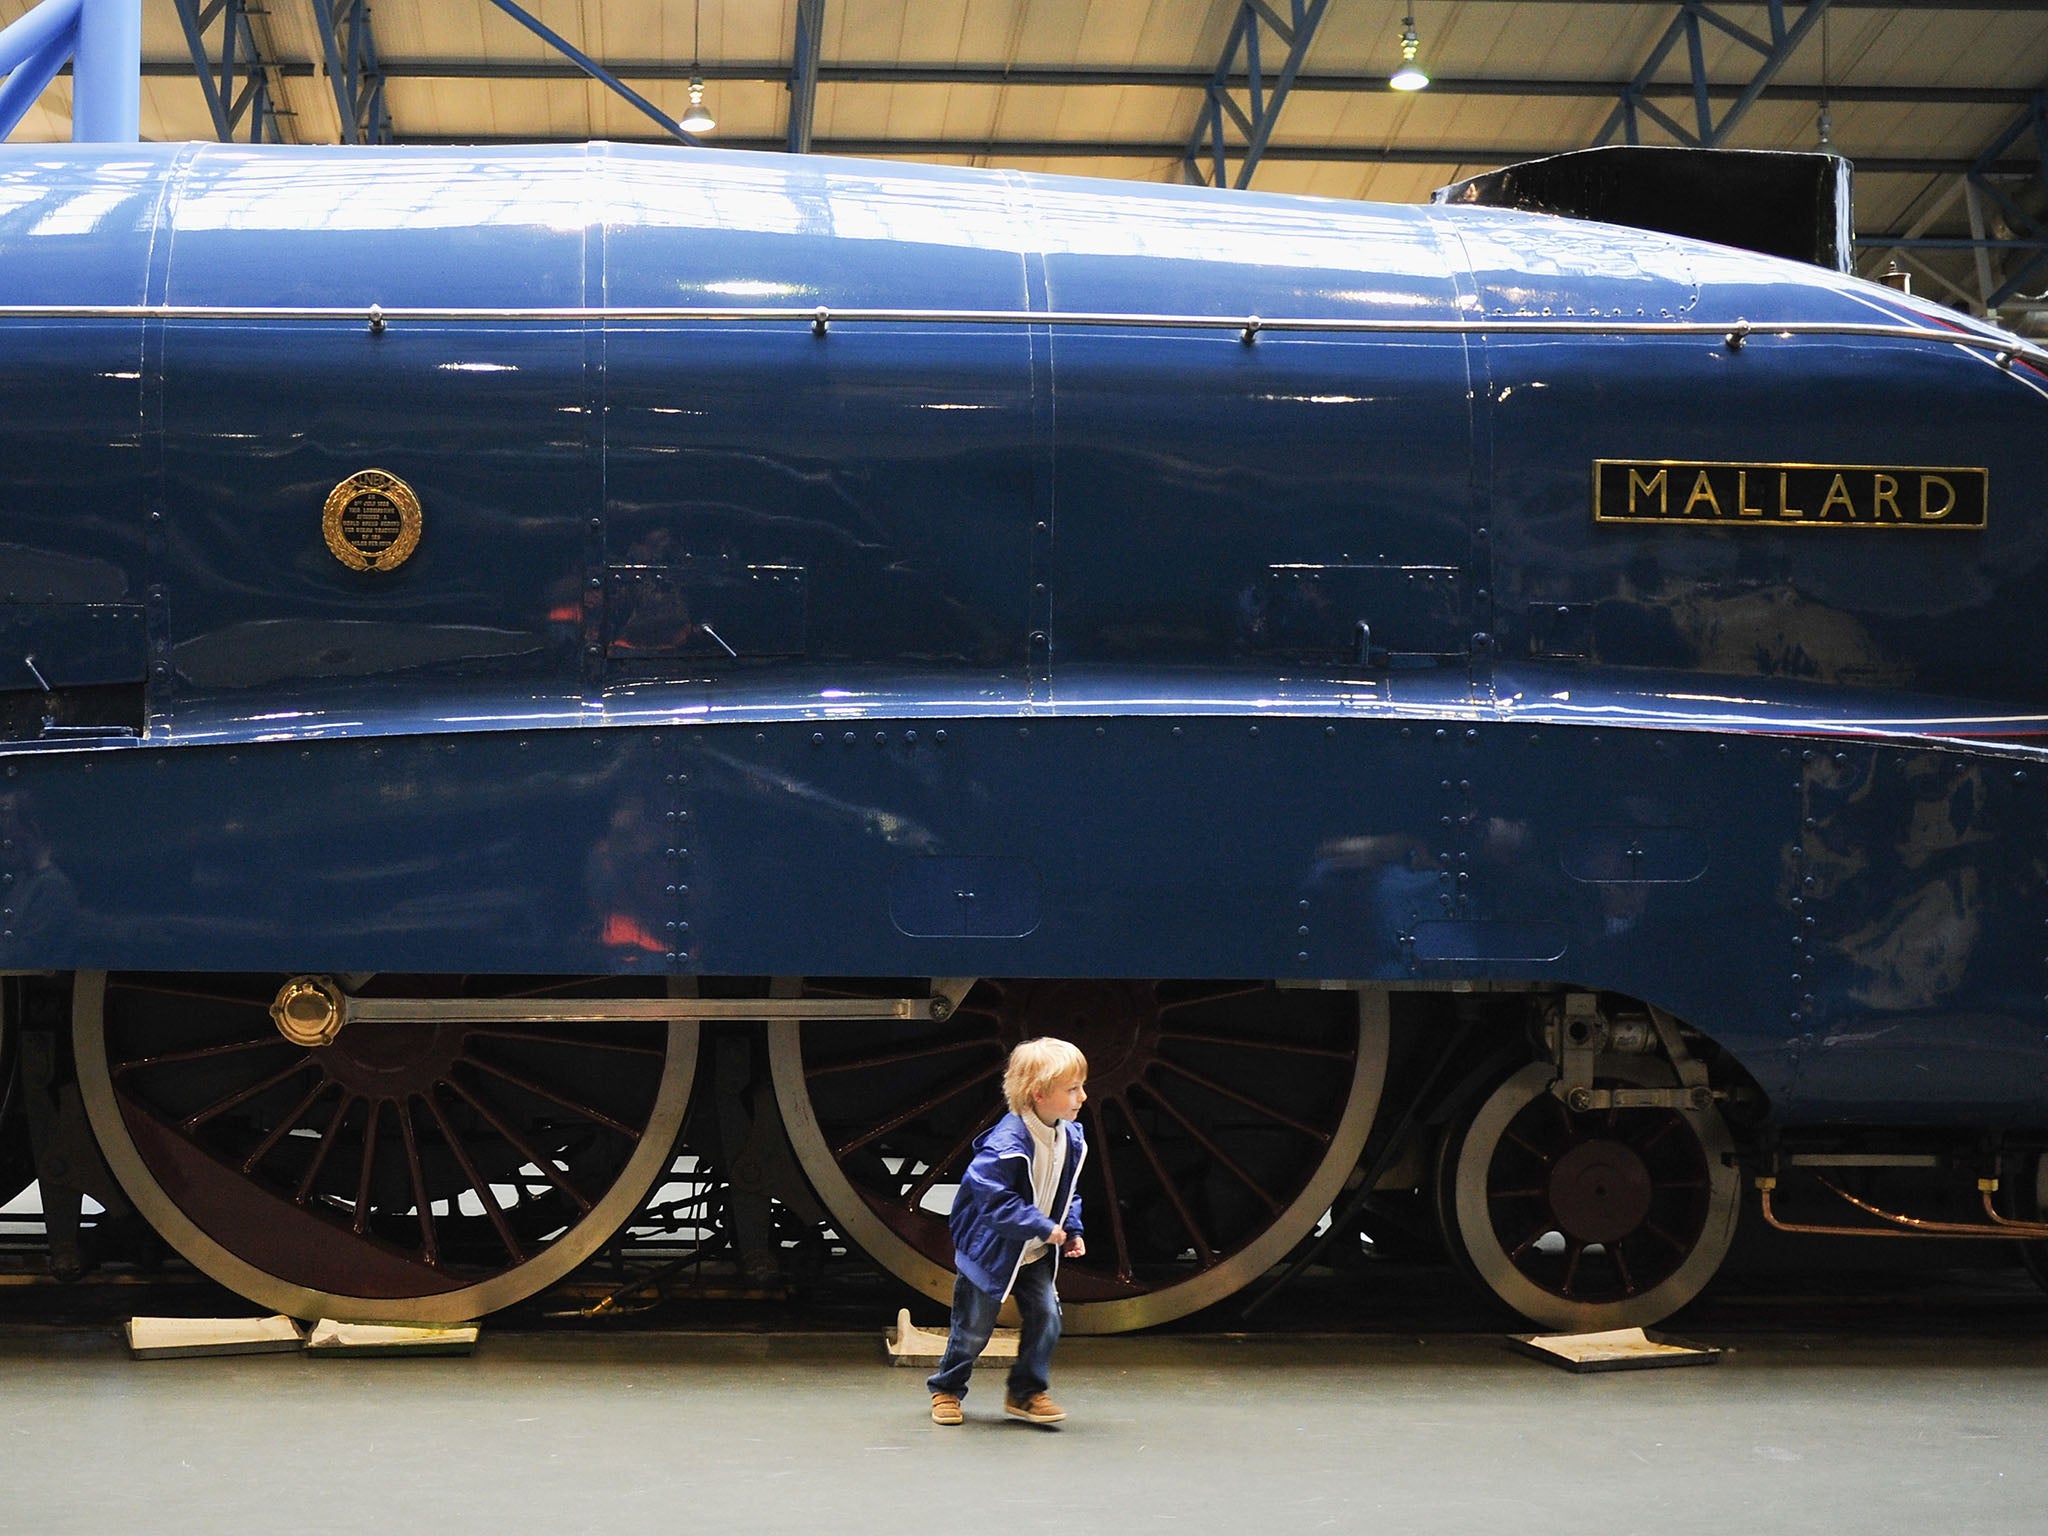 A child plays next to the Mallard at the National Railway Museum. The train was the fastest steam locomotive that was built on 3 March 1938